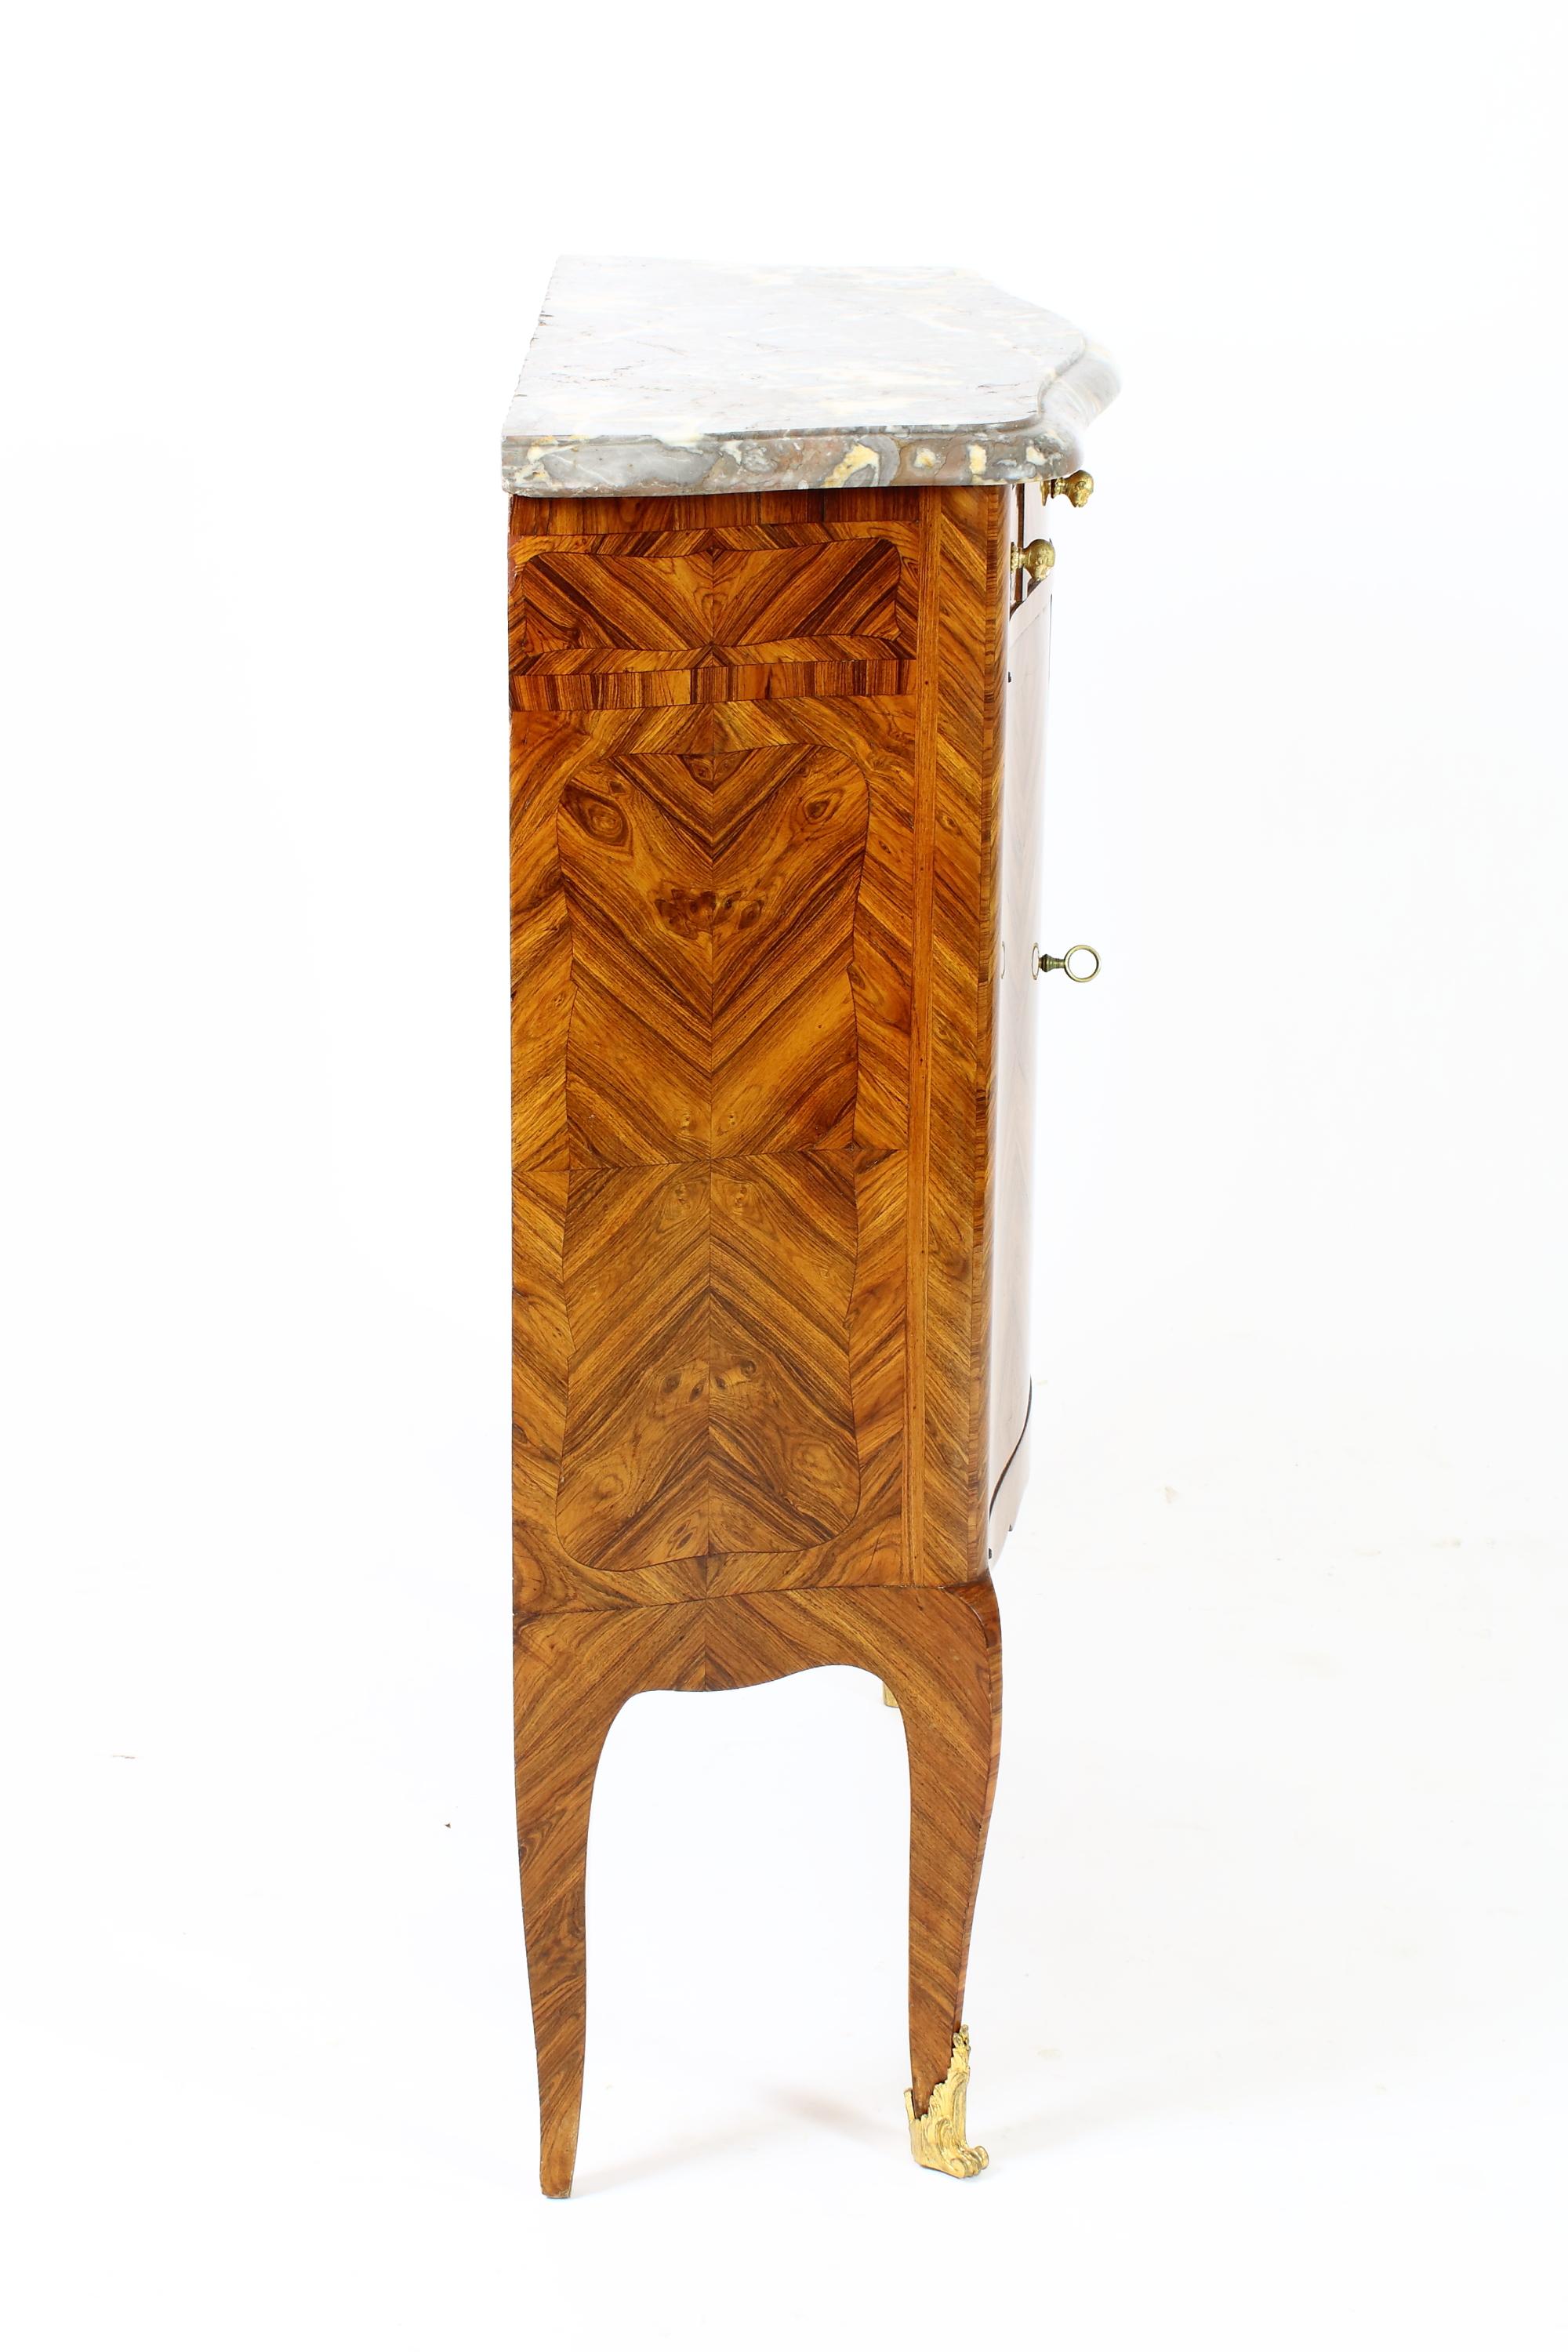 Small 19th Century French Marquetry NAP III Louis XV Cabinet or Meuble D’appui 2